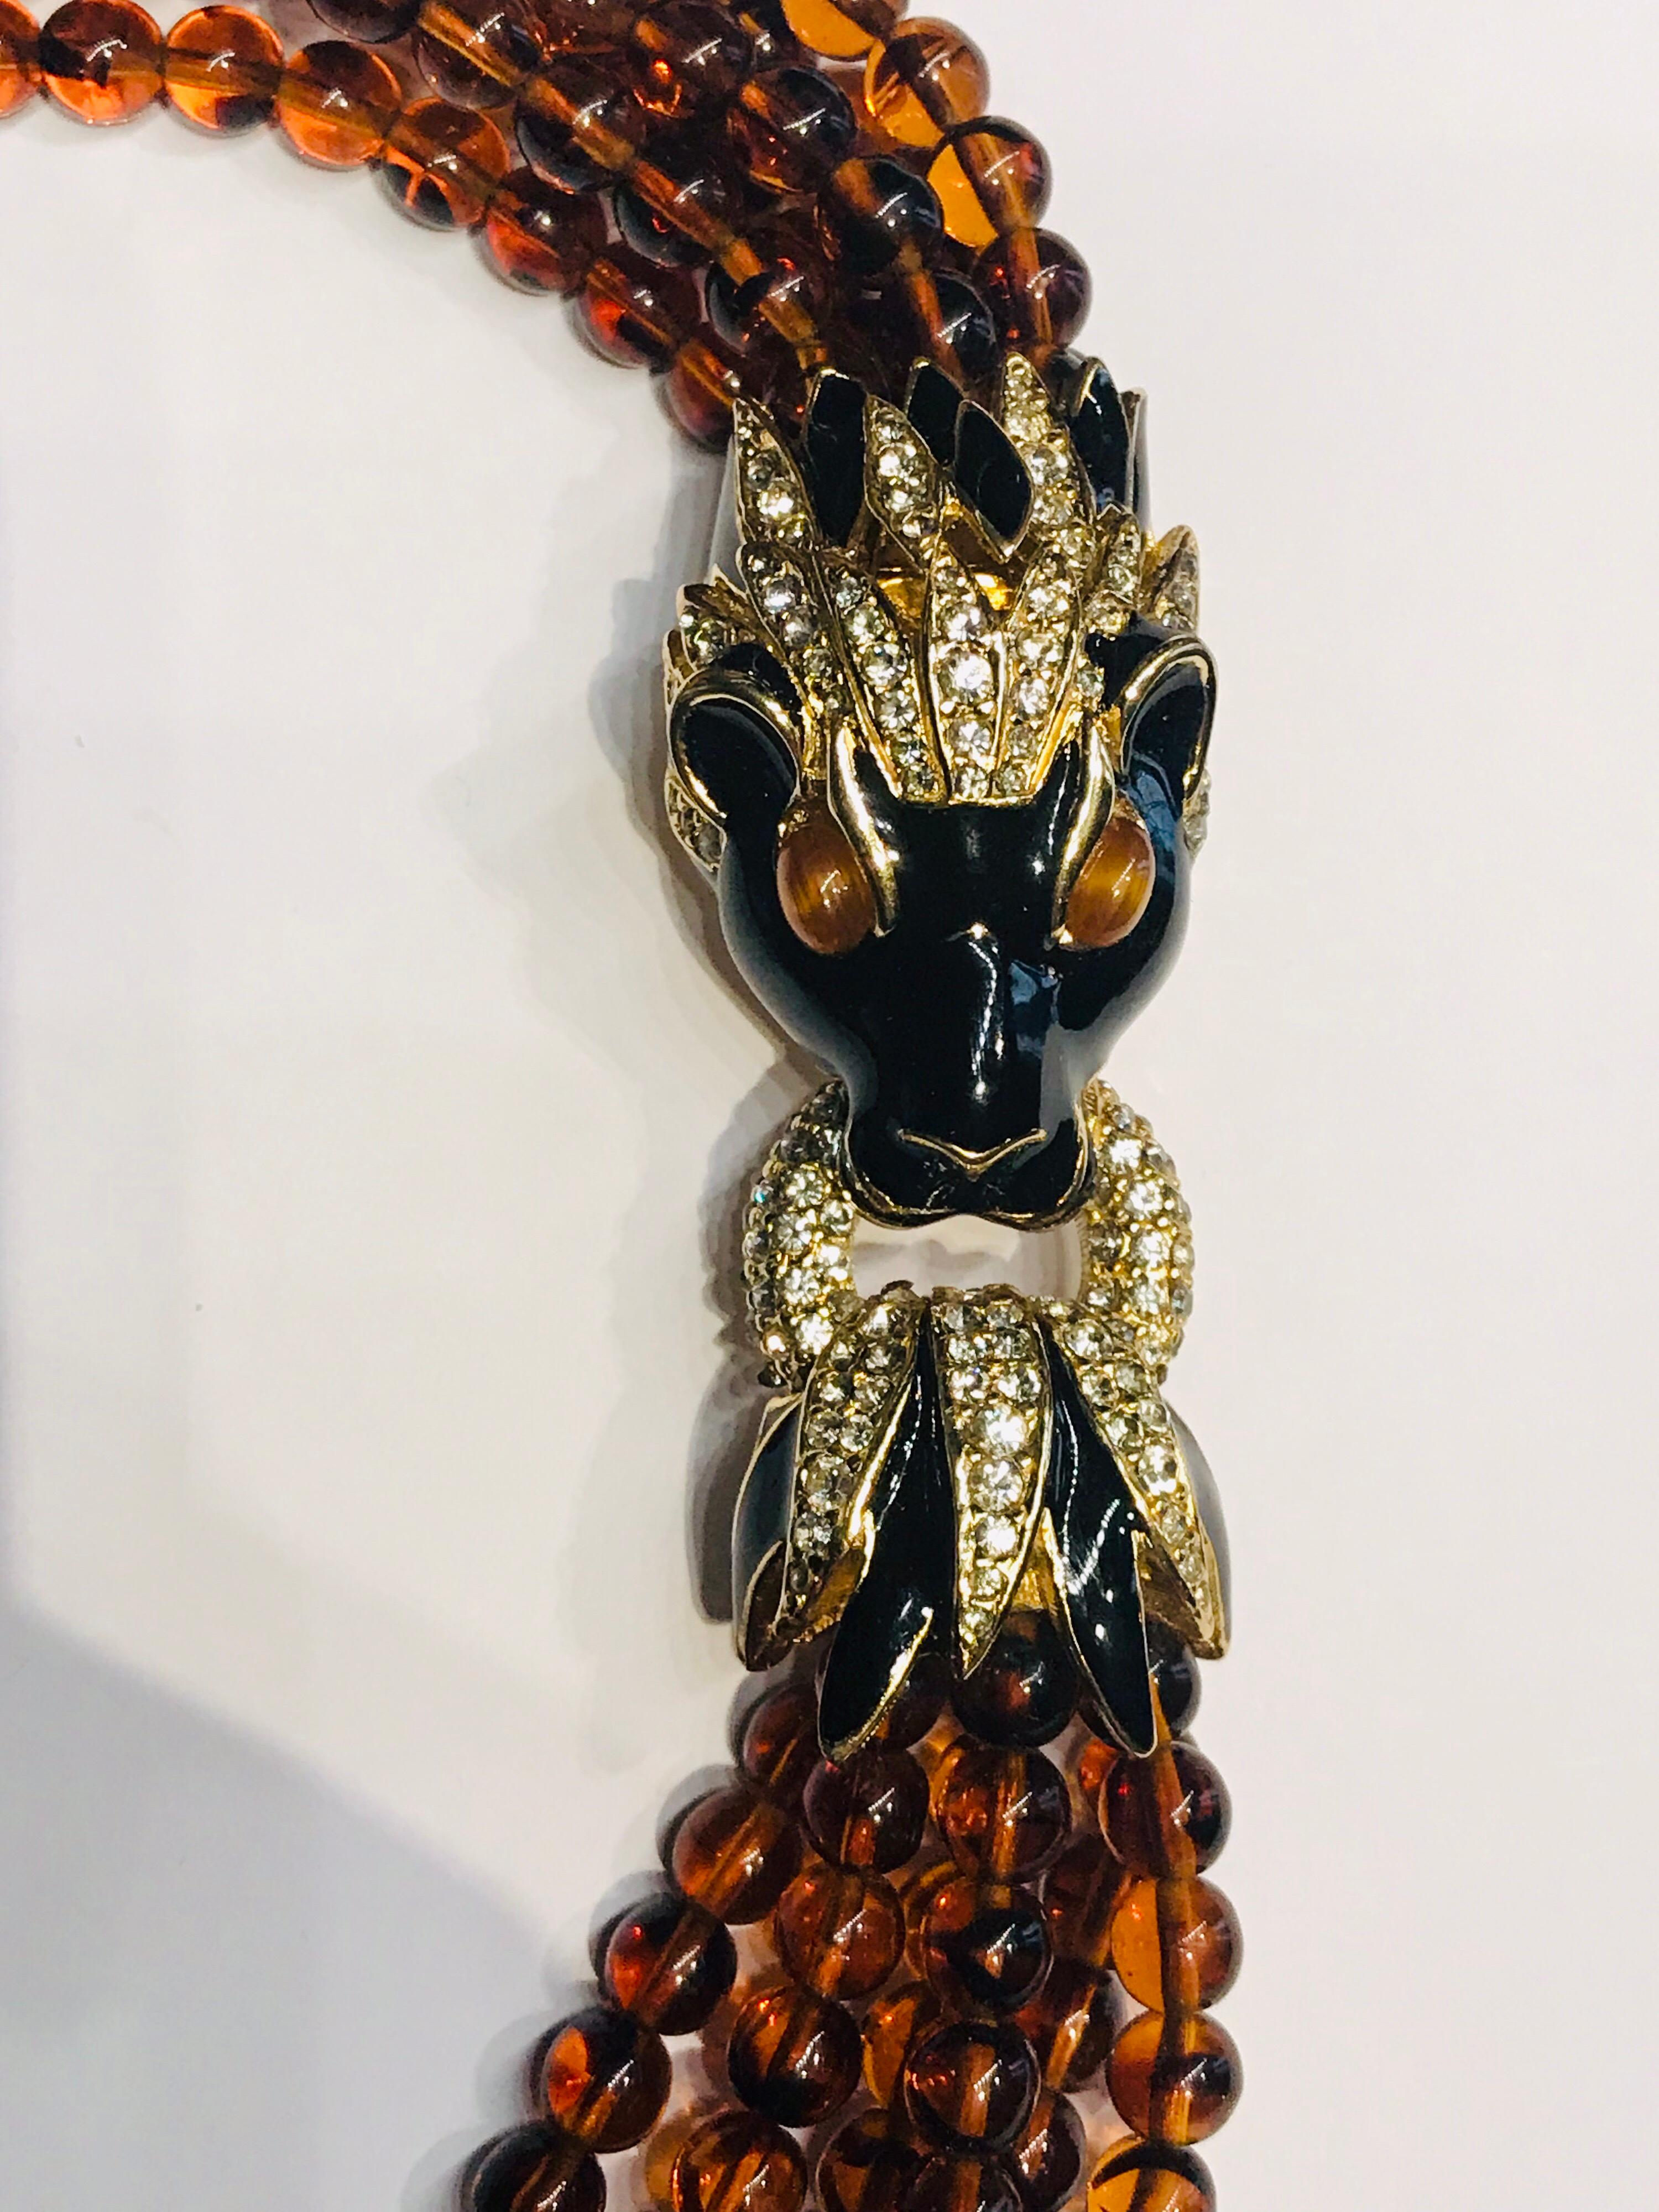 Beautiful Ciner tornado necklace from the 1980s. The necklace has six strands of 5 mm faux amber glass beads and a Lion head and ring clasp. The clasp is black enamel, gold plate and Swarovski crystal rhinestone. In the mane of the lion head is a